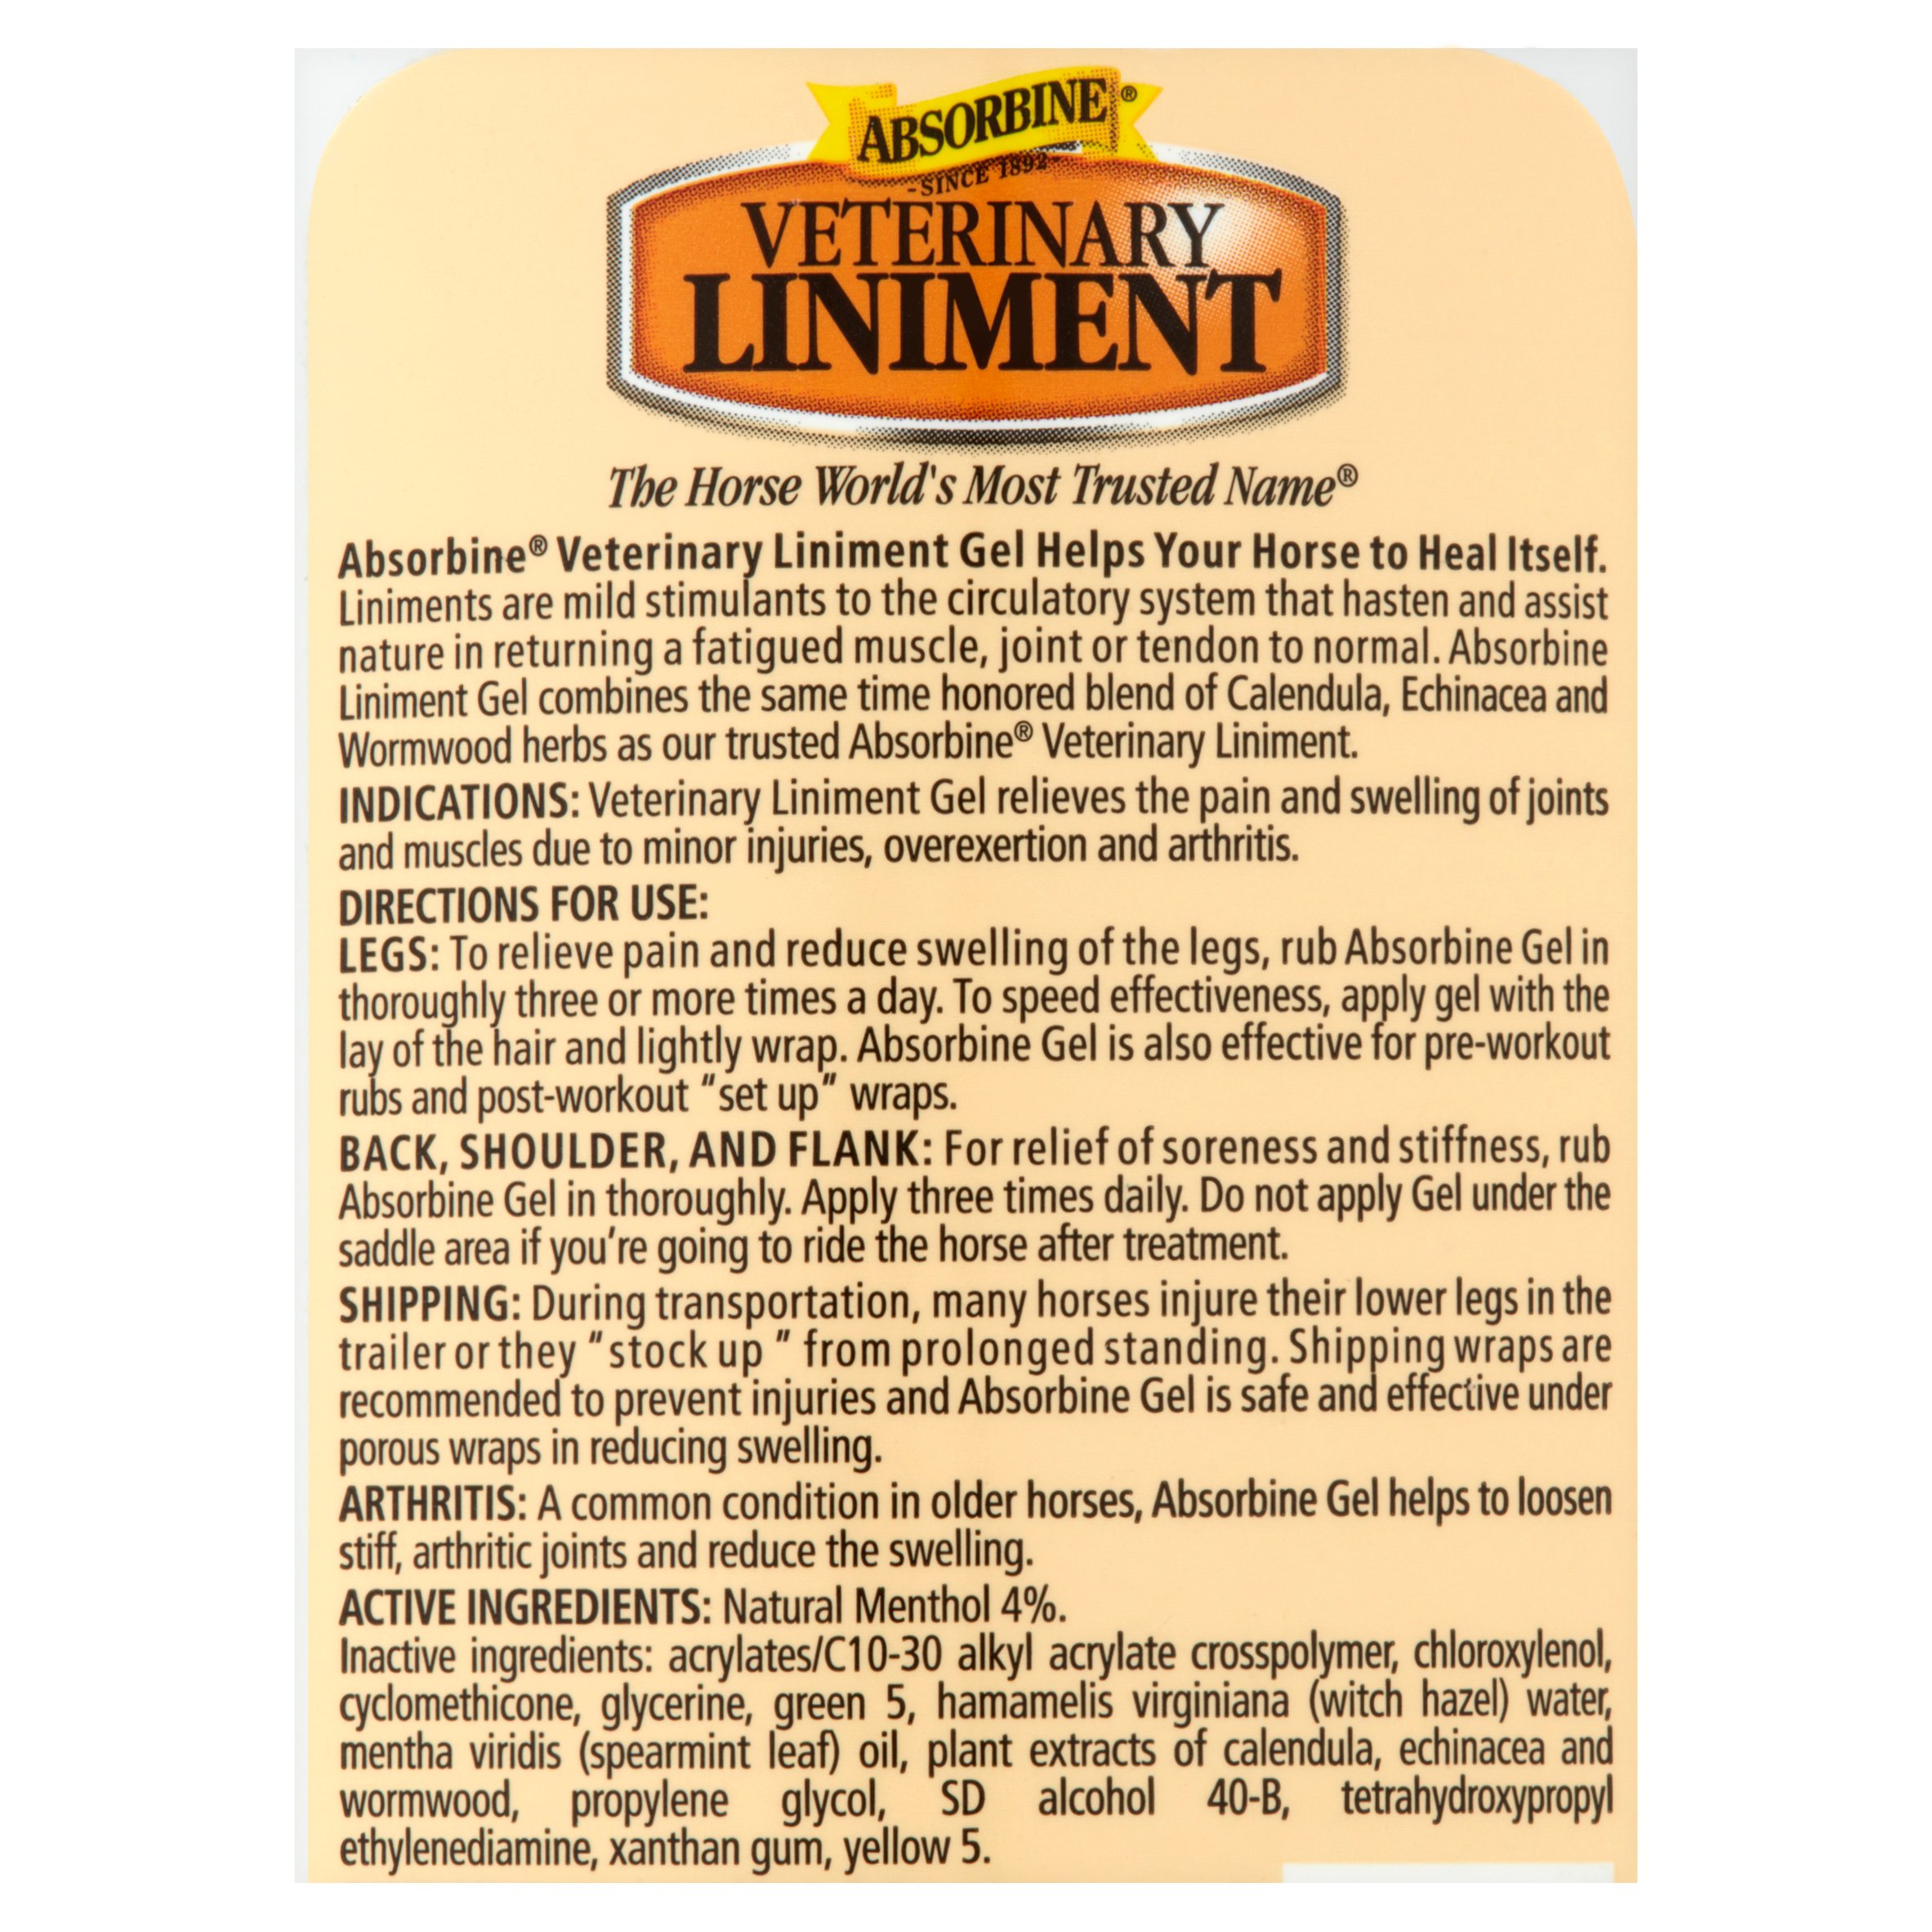 Absorbine Veterinary Liniment Spearmint Herbal Gel Topical Analgesic, 12 oz - image 4 of 4